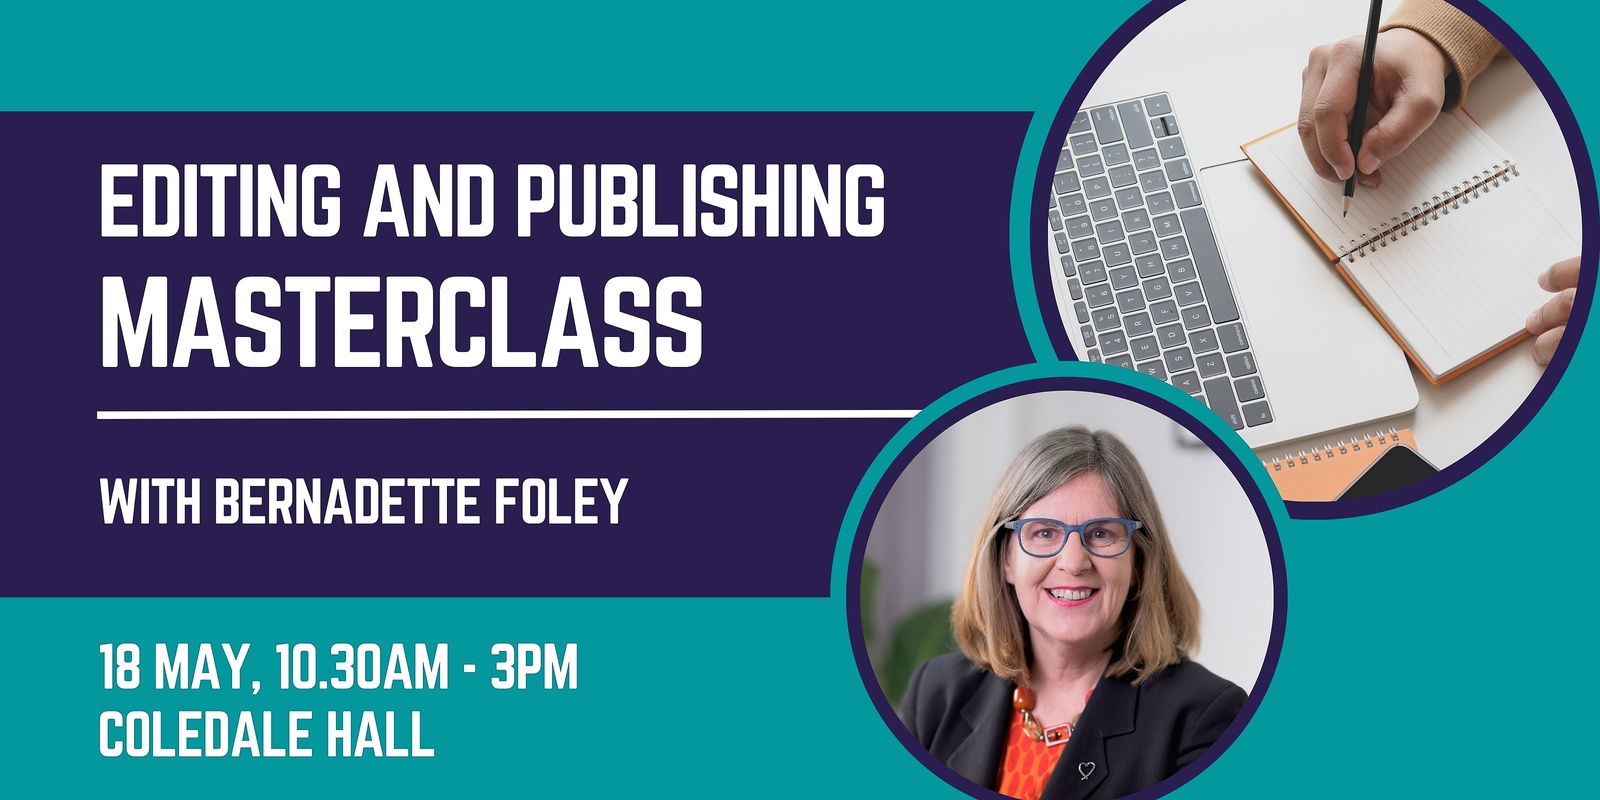 Banner image for Editing and Publishing Masterclass with Bernadette Foley